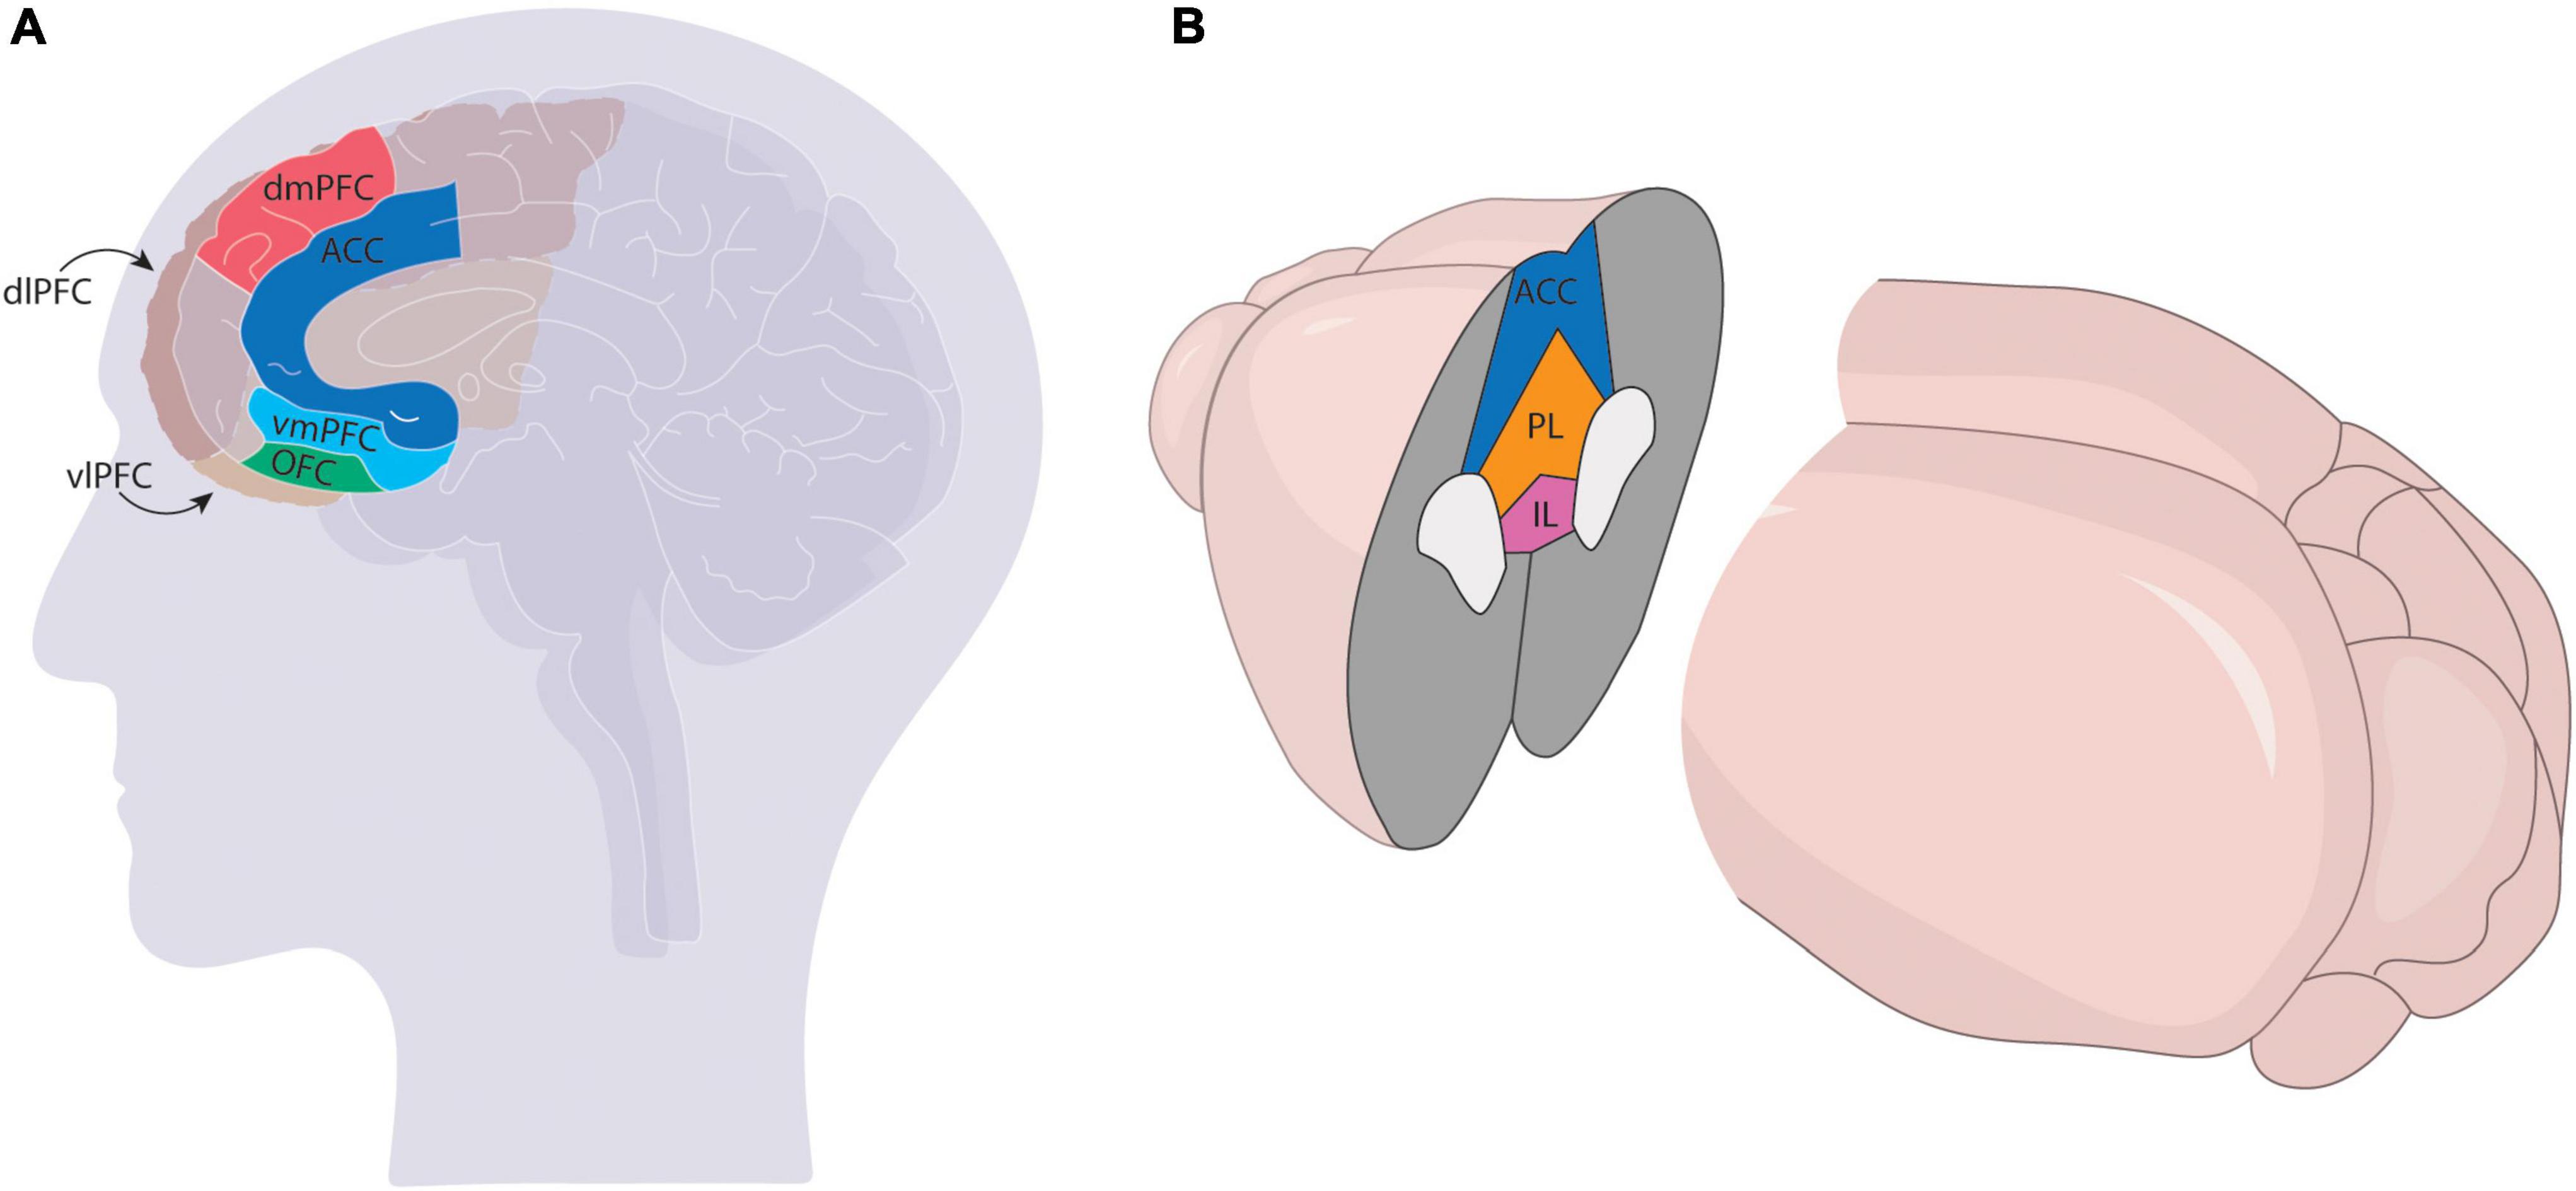 Frontiers | Defining the interconnectivity of the medial